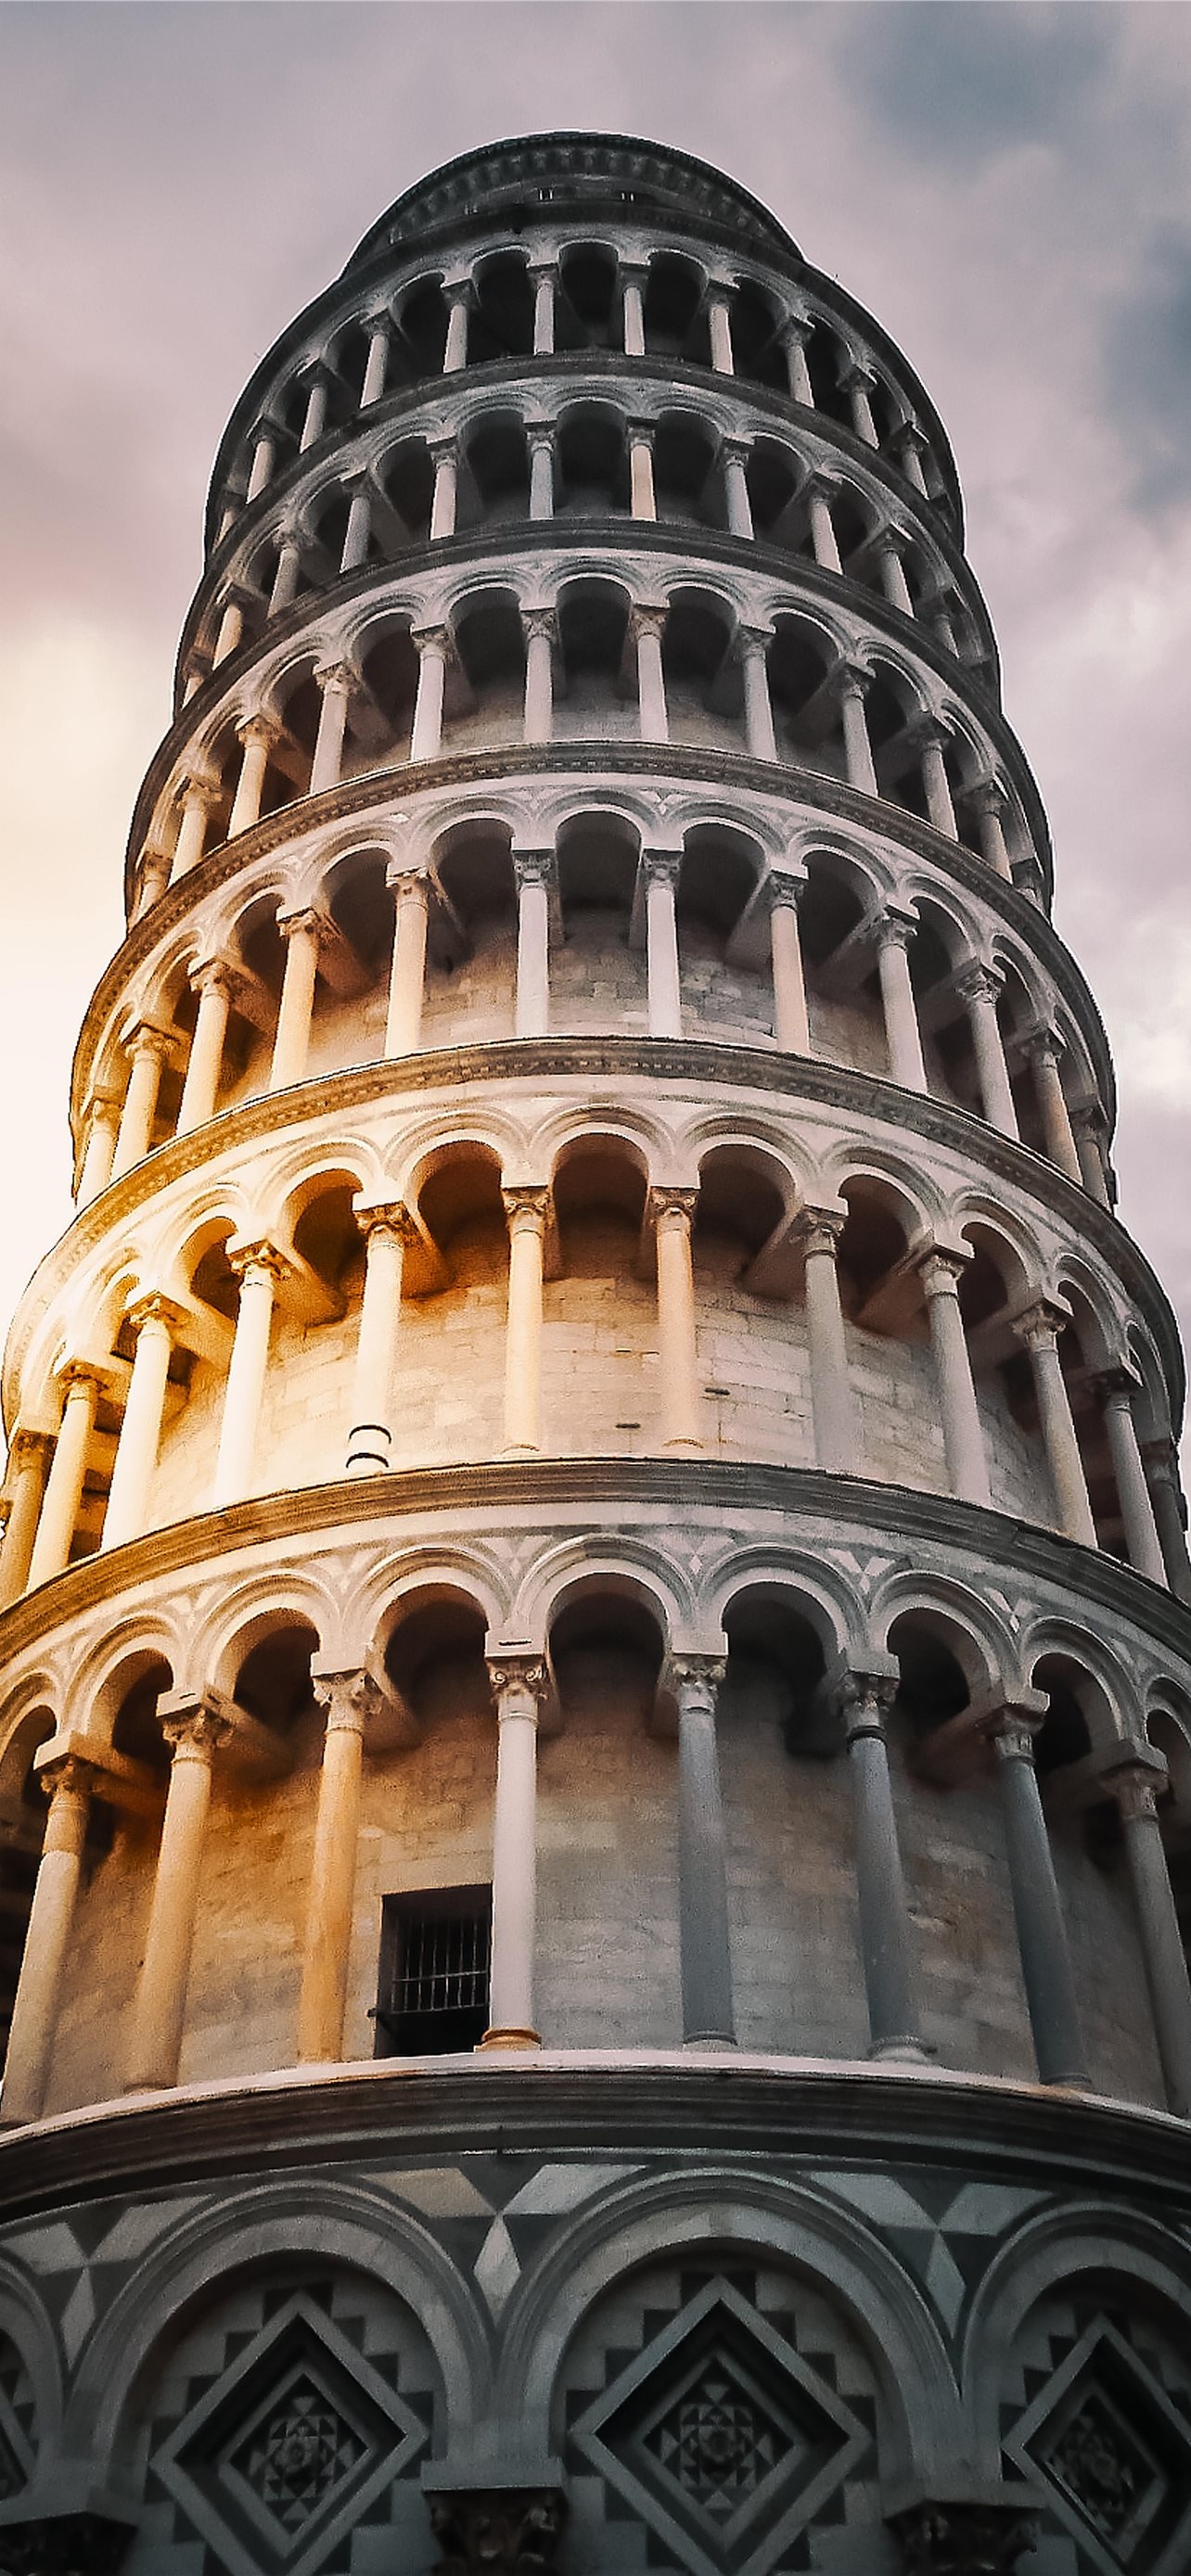 Best Pisa iPhone wallpapers, High-quality images, Mobile backgrounds, Picture-perfect, 1290x2780 HD Phone